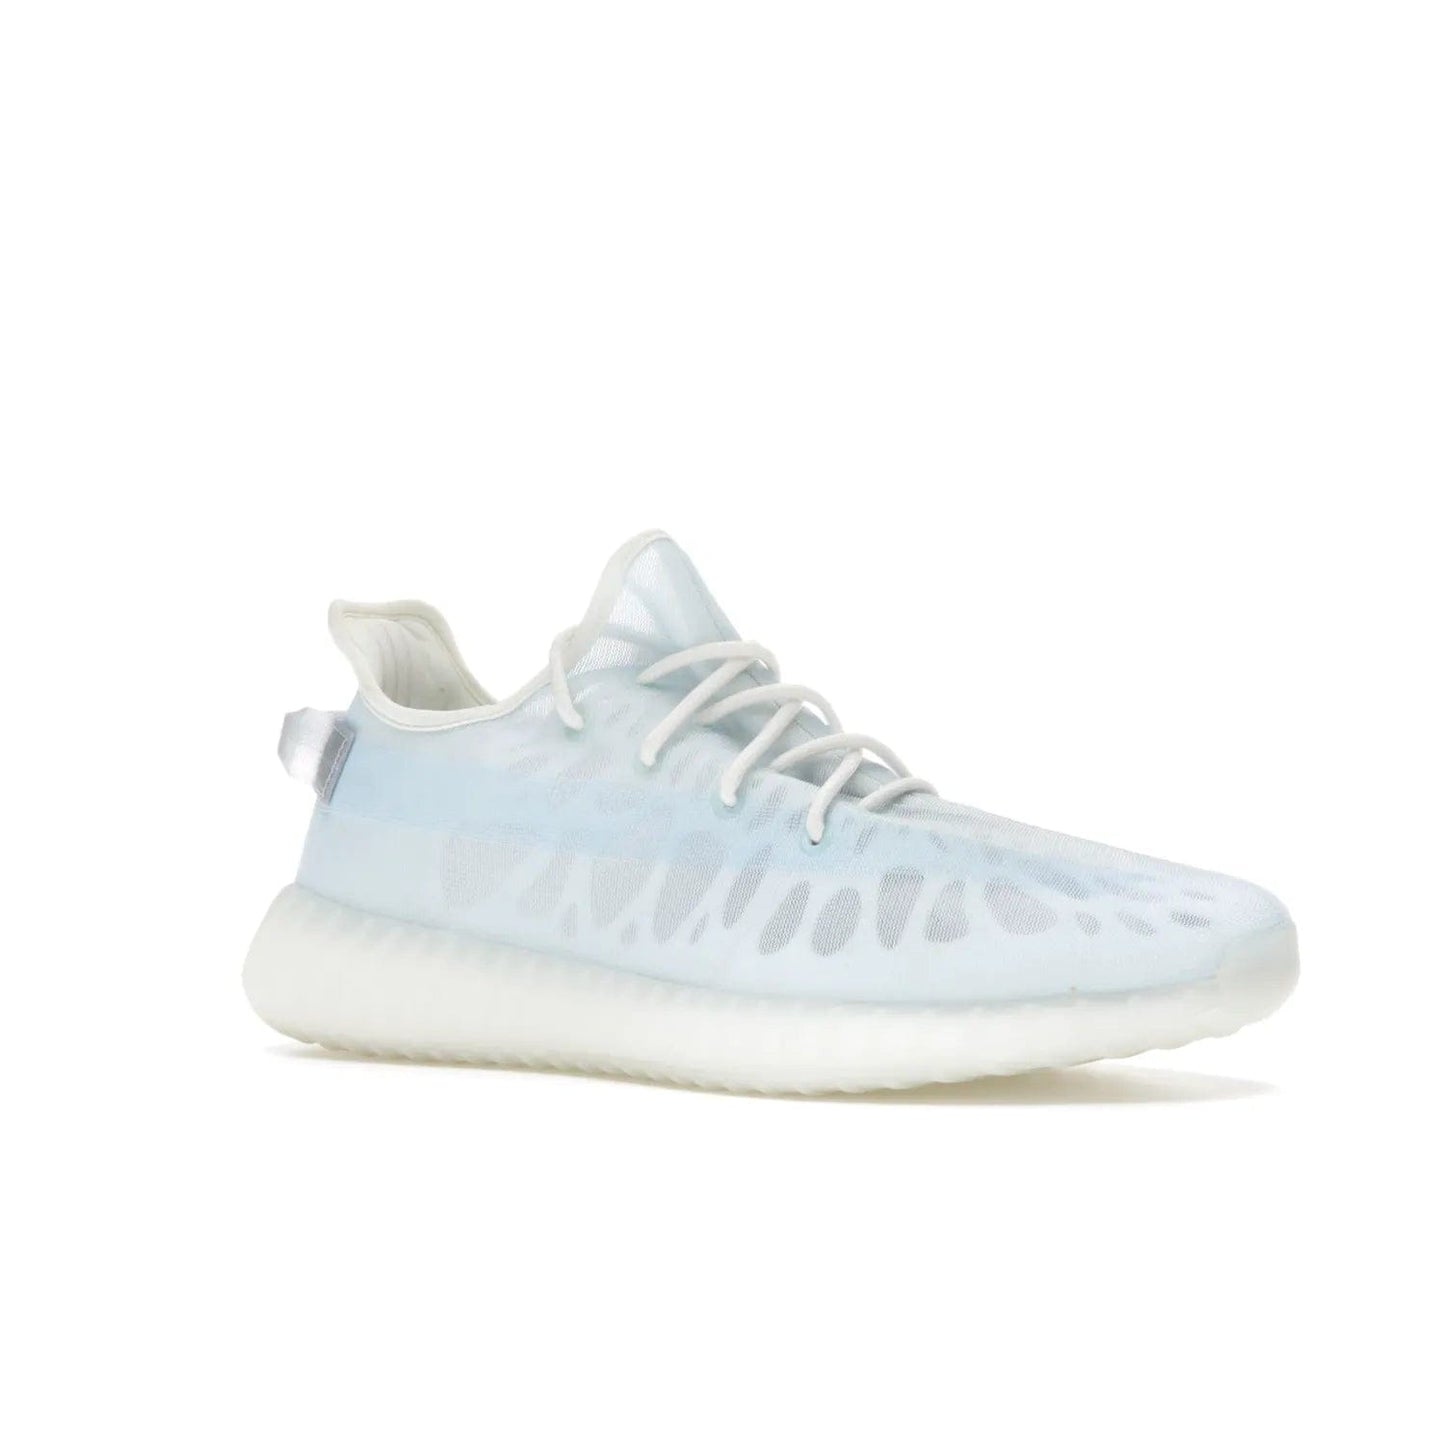 adidas Yeezy Boost 350 V2 Mono Ice - Image 4 - Only at www.BallersClubKickz.com - Introducing the adidas Yeezy 350 V2 Mono Ice - a sleek monofilament mesh design in Ice blue with Boost sole and heel pull tab. Released exclusively in the US for $220.